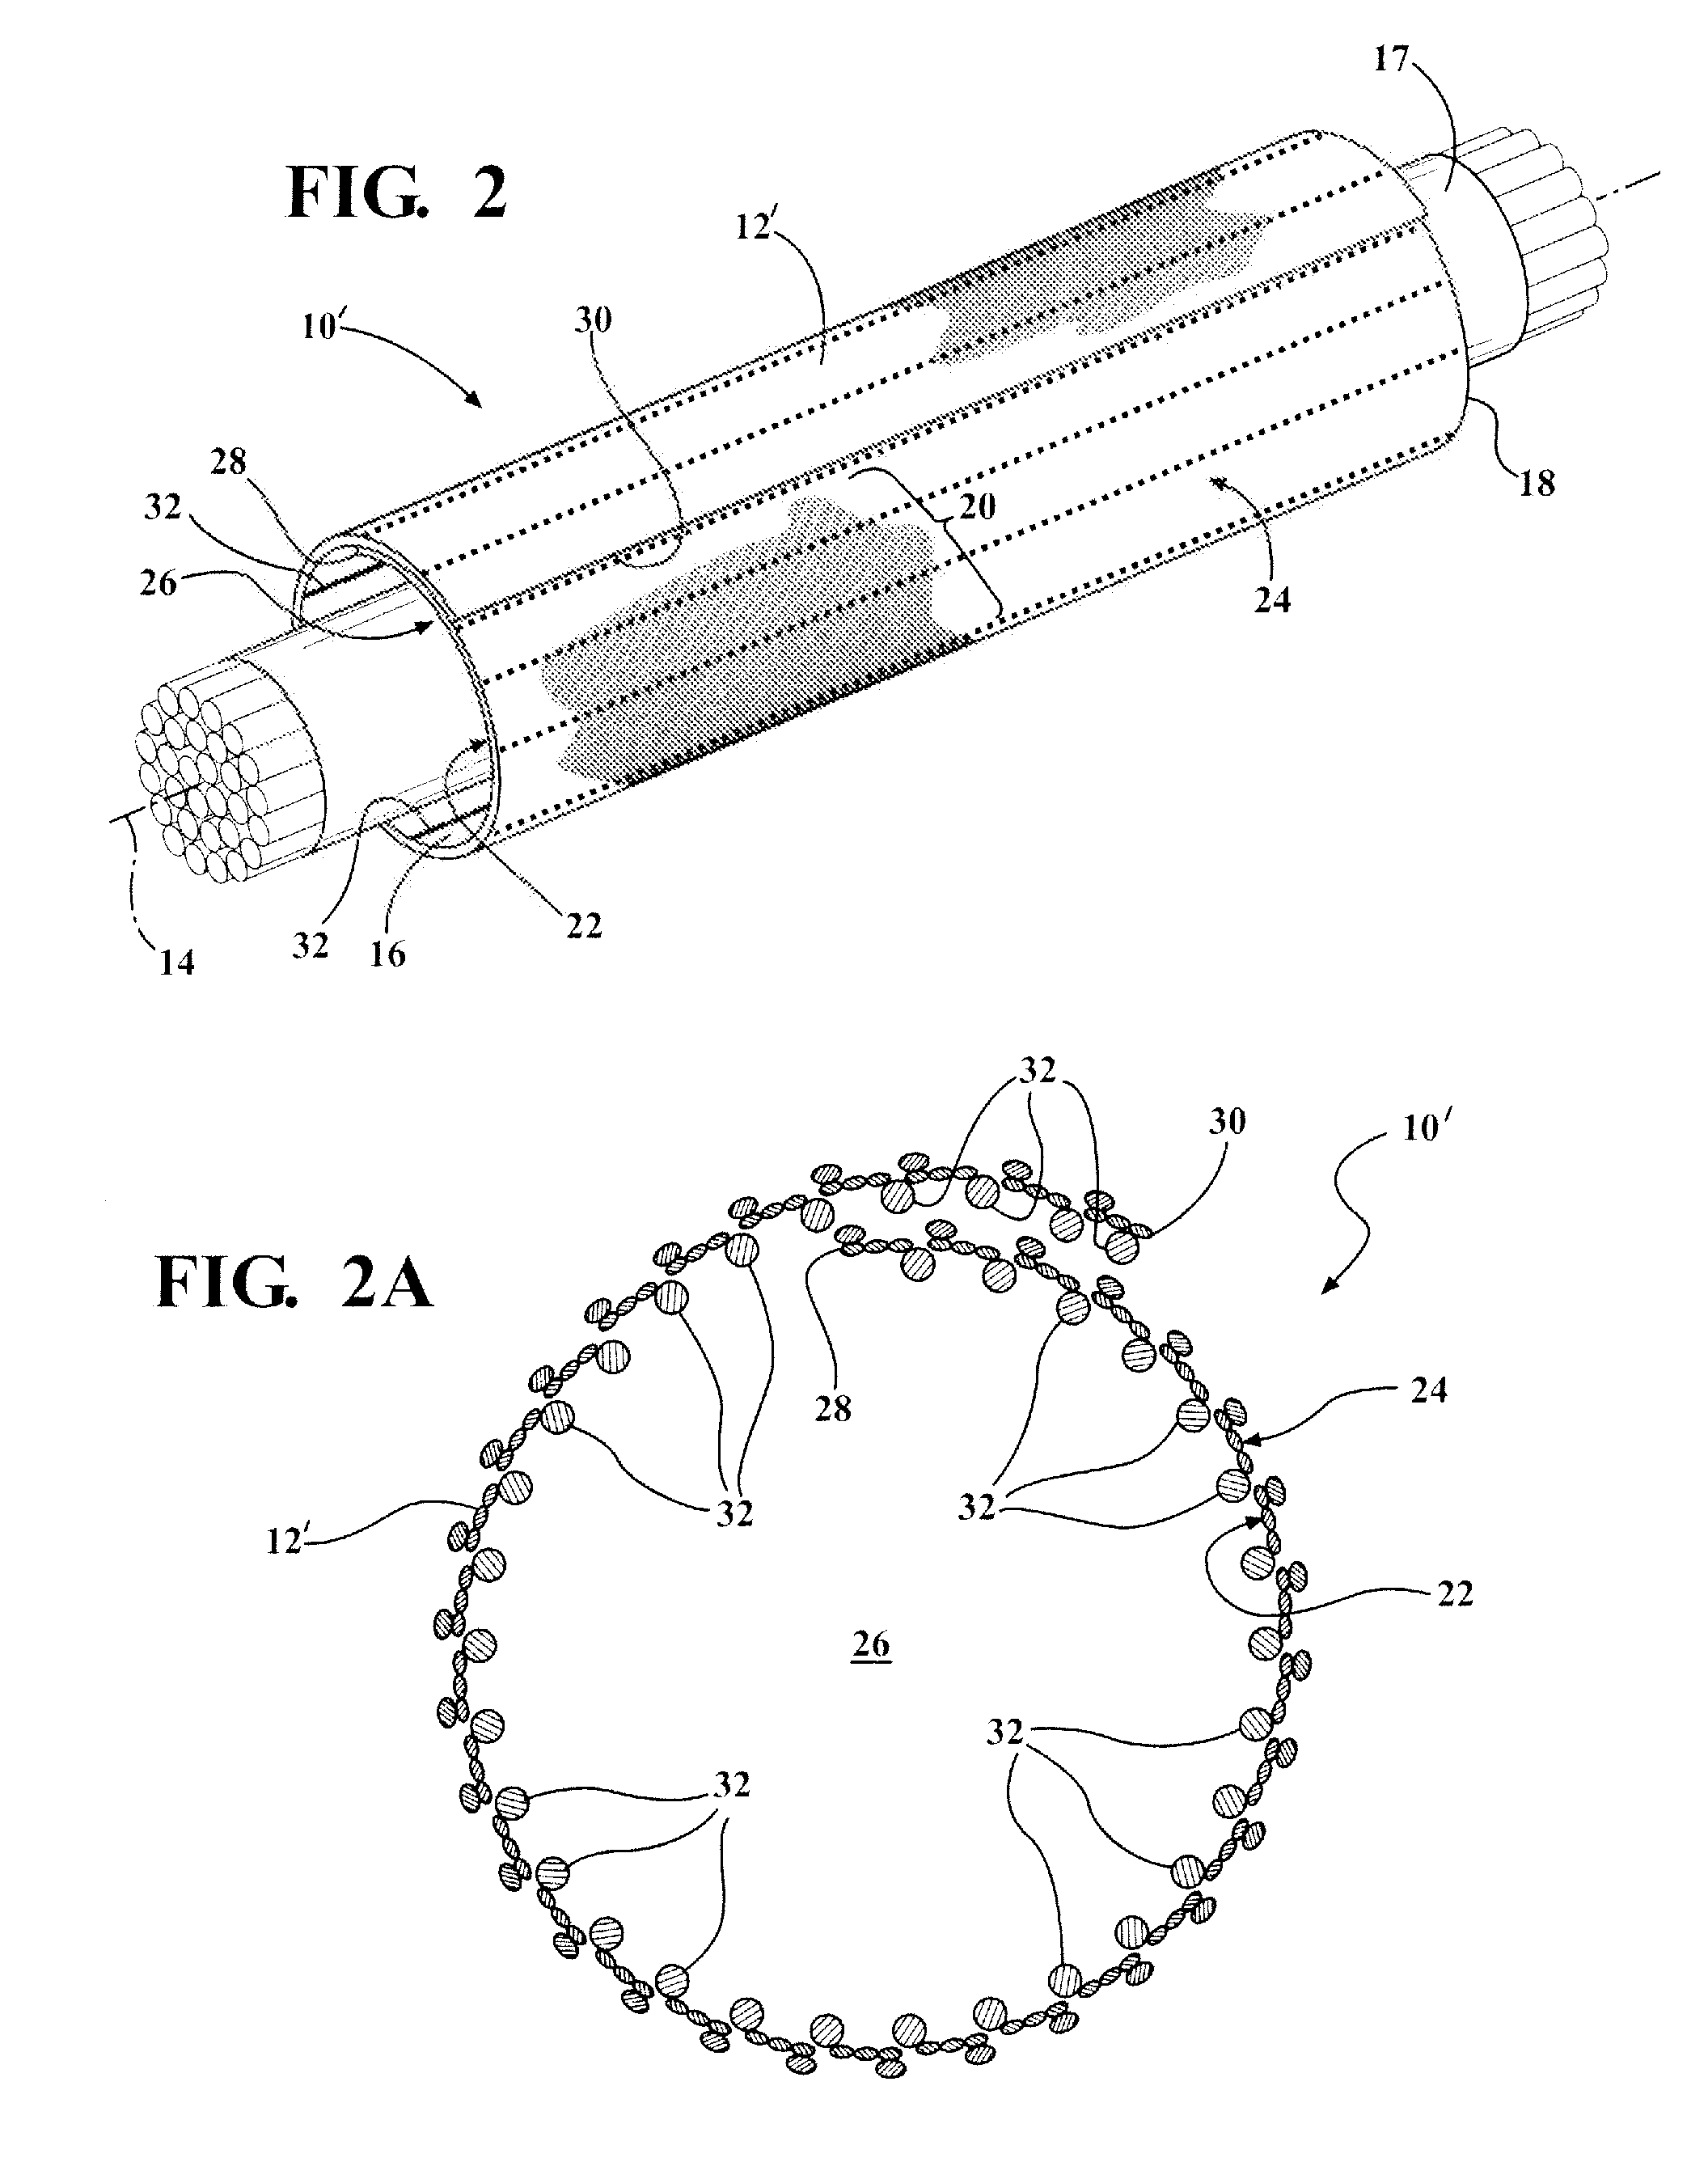 Enhanced Braided Sleeve and Method of Construction Thereof